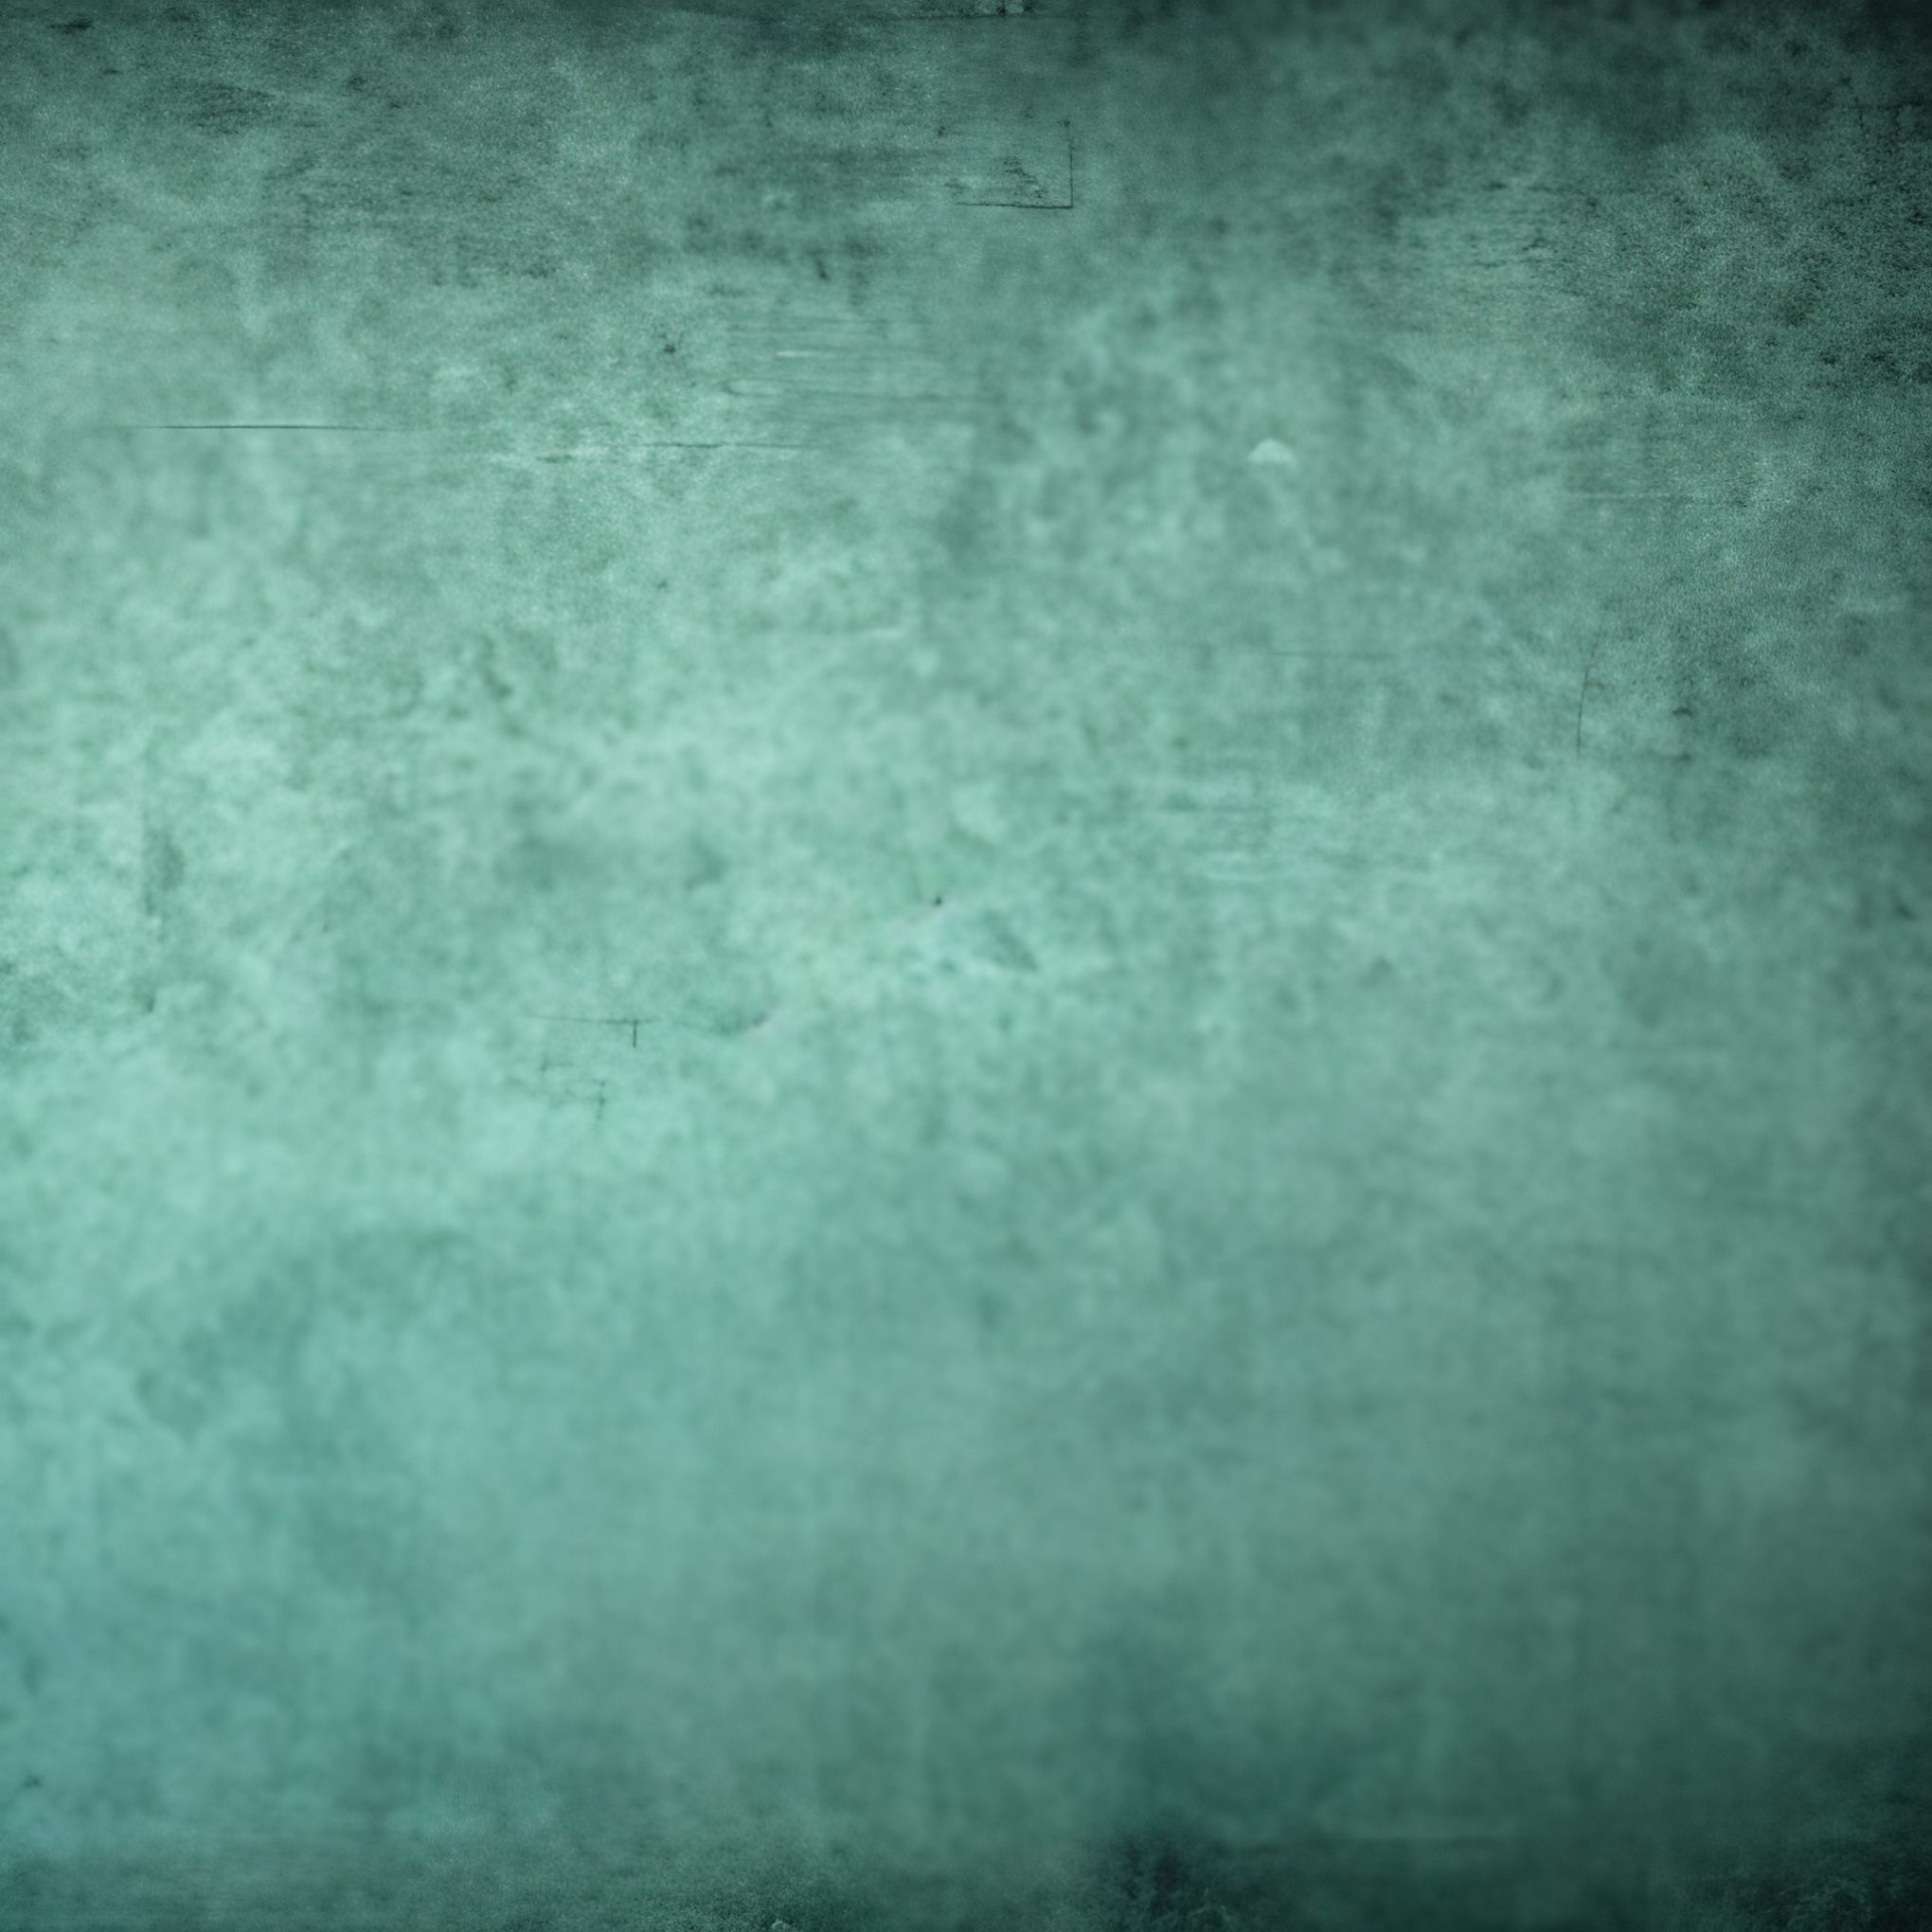 Faded Blue Dirty Grunge Concrete Background Texture Free Image